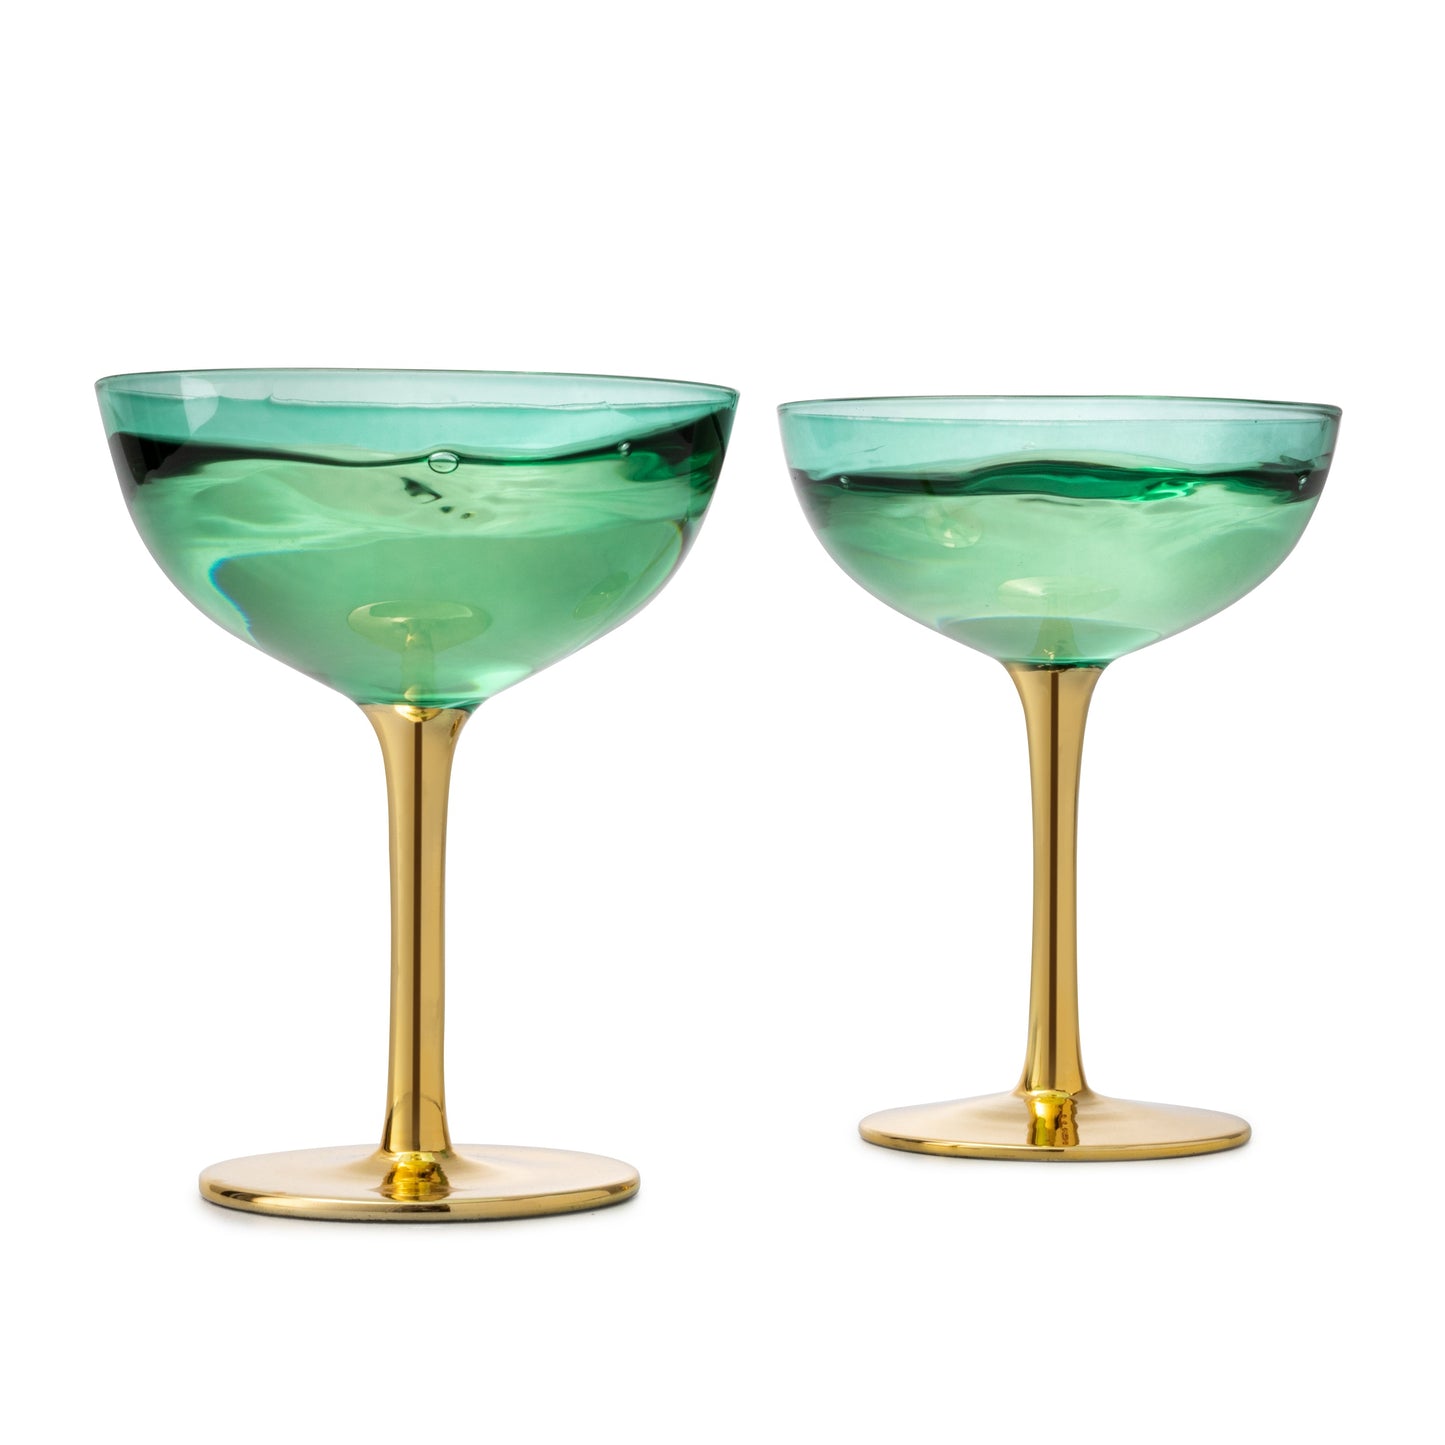 Deco Coupe Cocktail Glassware, Set of 2